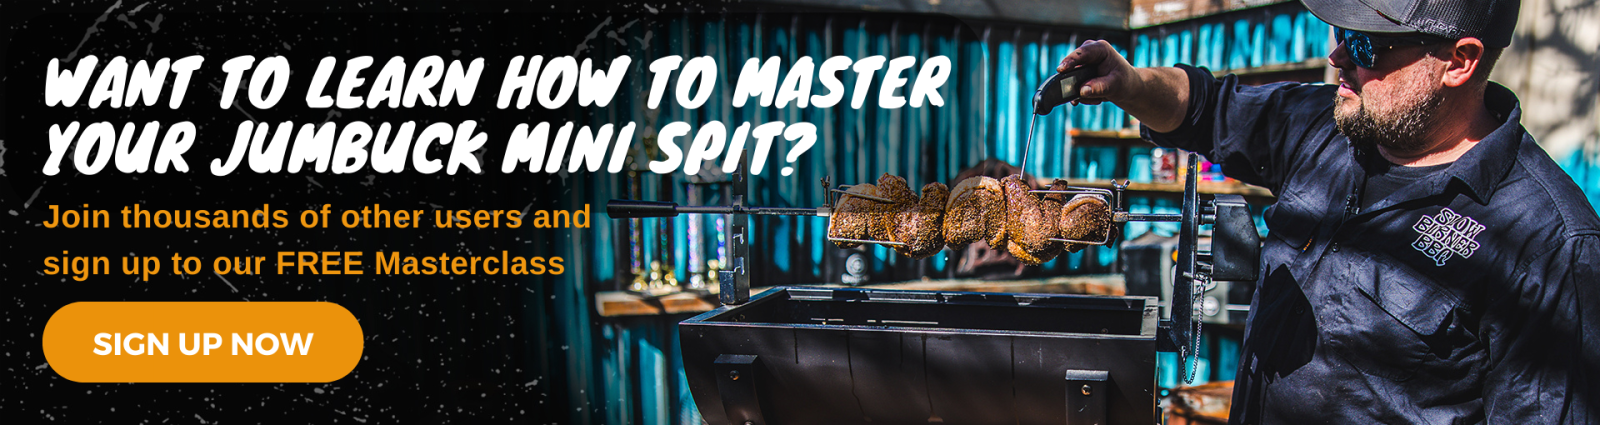 This is a banner that allows you to join and download the Jumbuck mini spit master class.